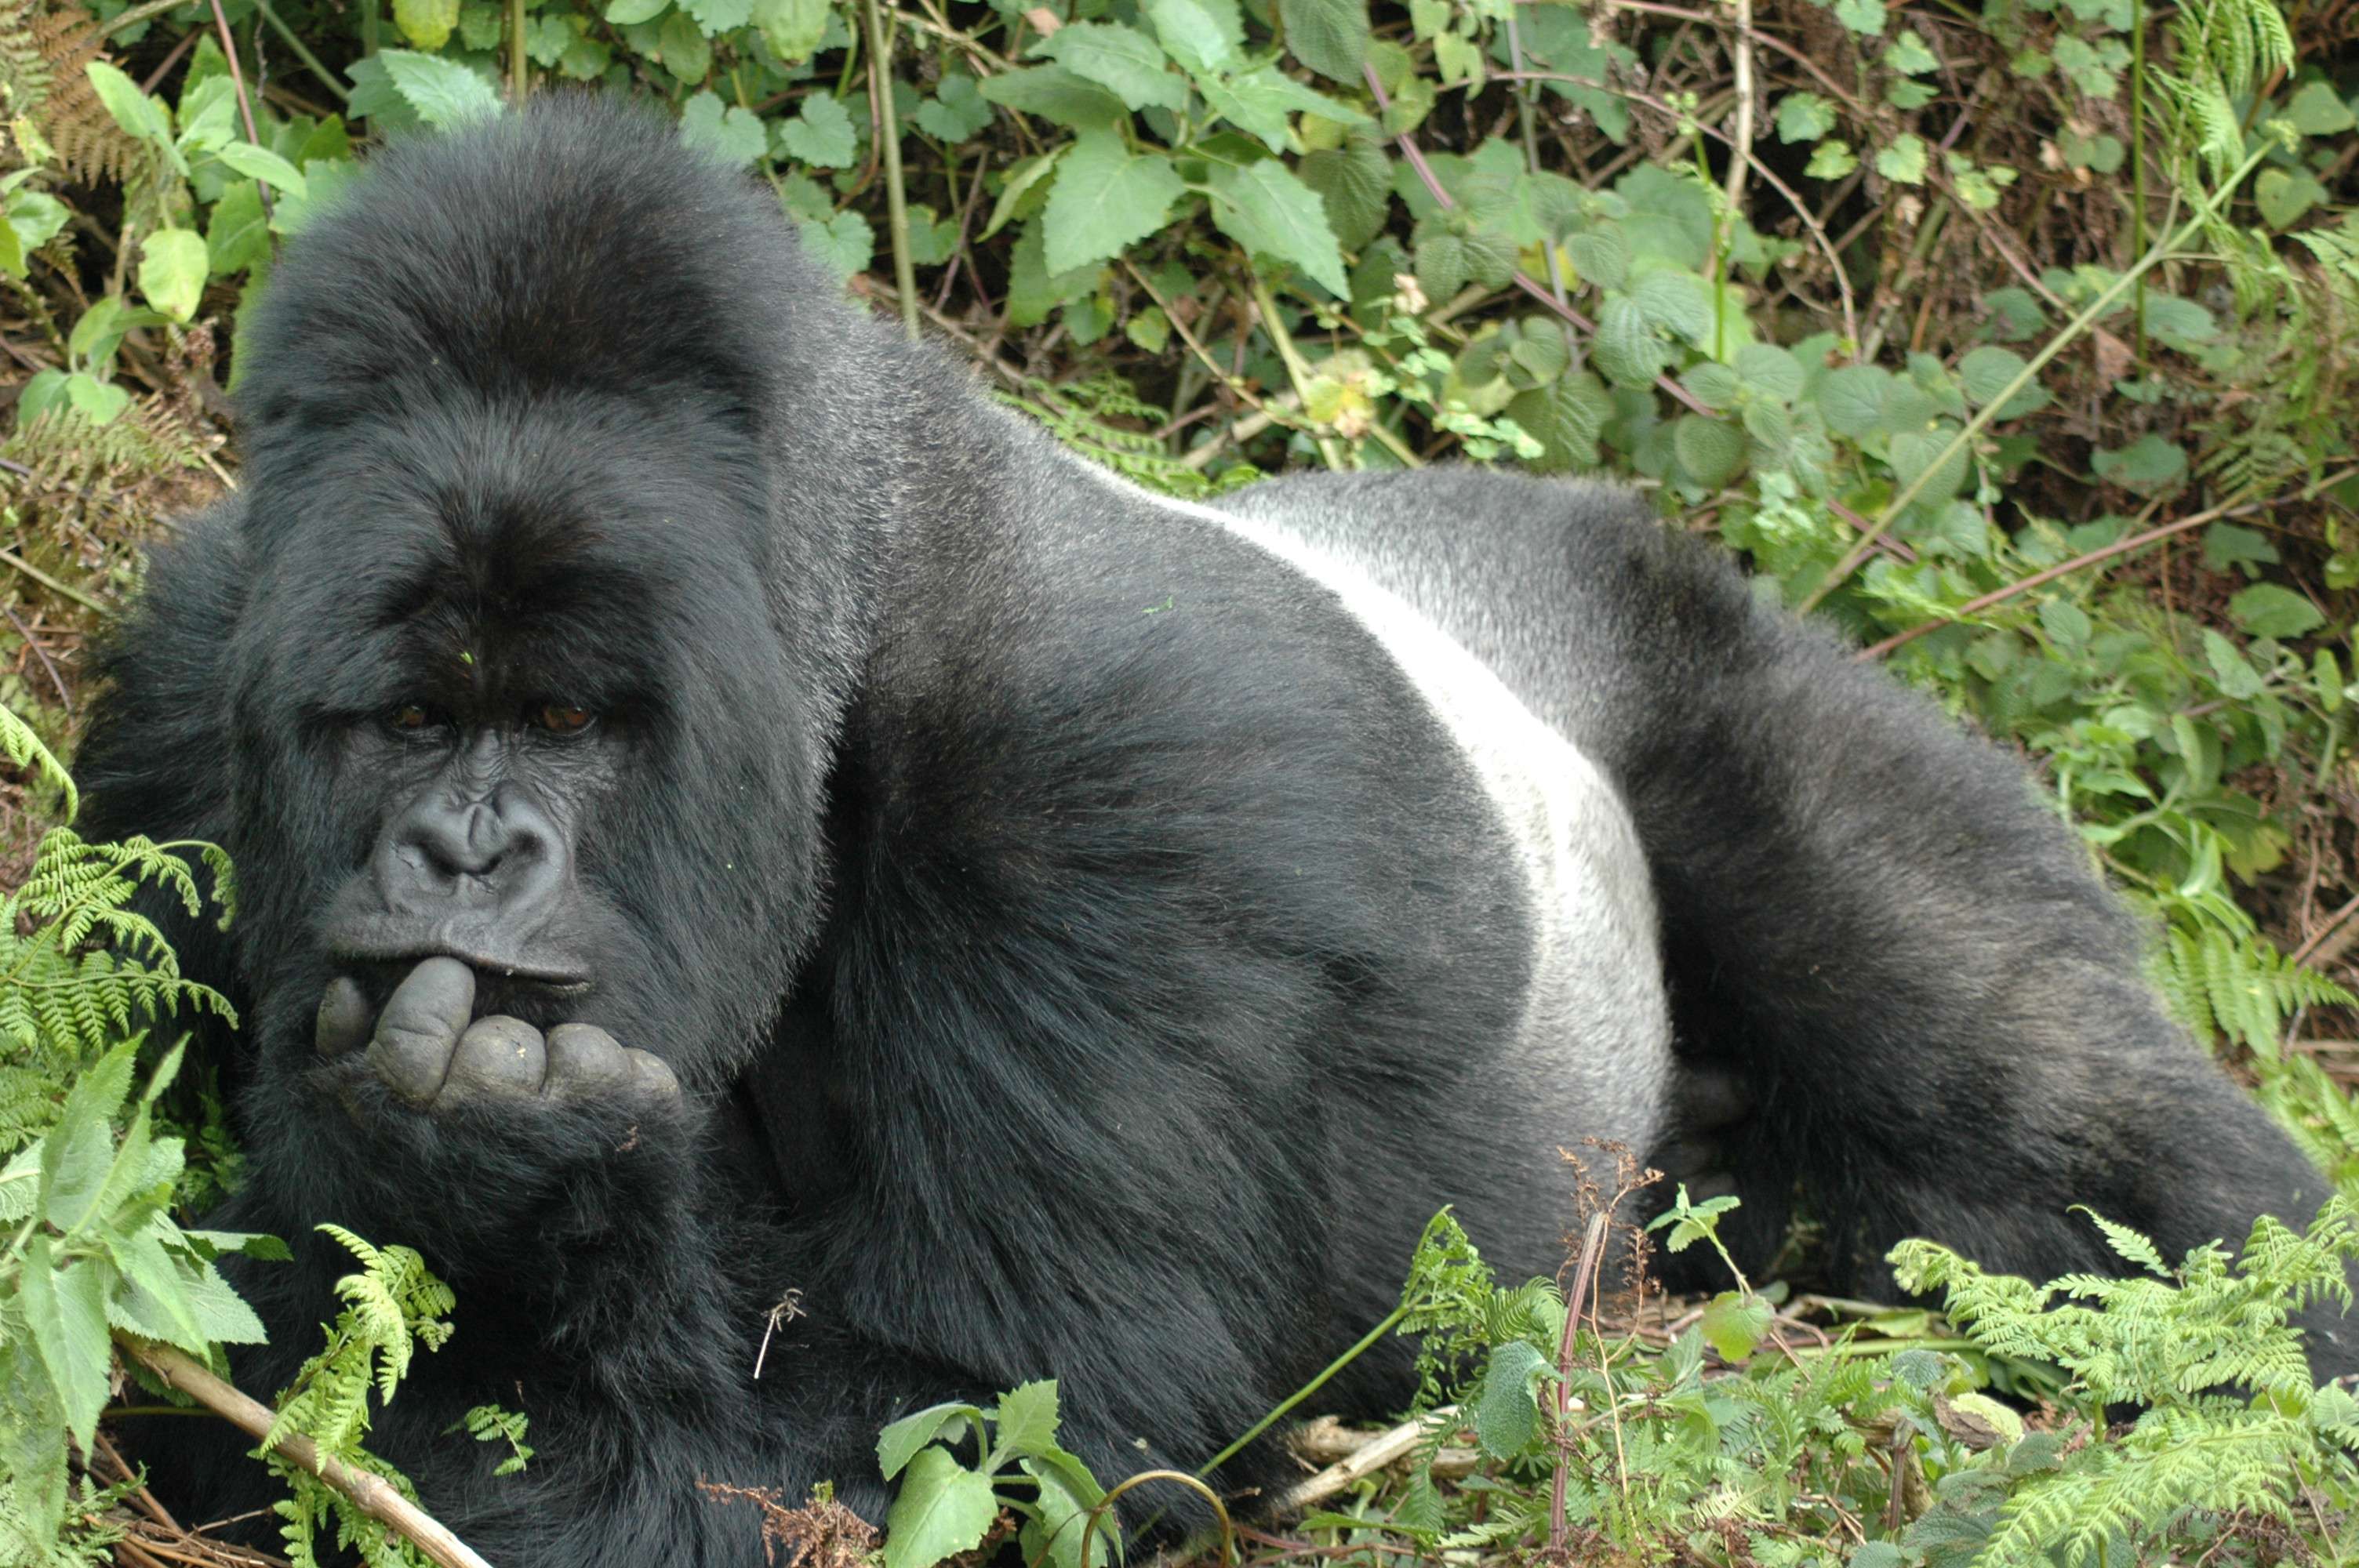 Since the discovery of the mountain gorilla subspecies in 1902, its population has endured years of war, hunting, habitat destruction and disease, their population is estimated to be around 786 today. © Trista Gauge/NHA